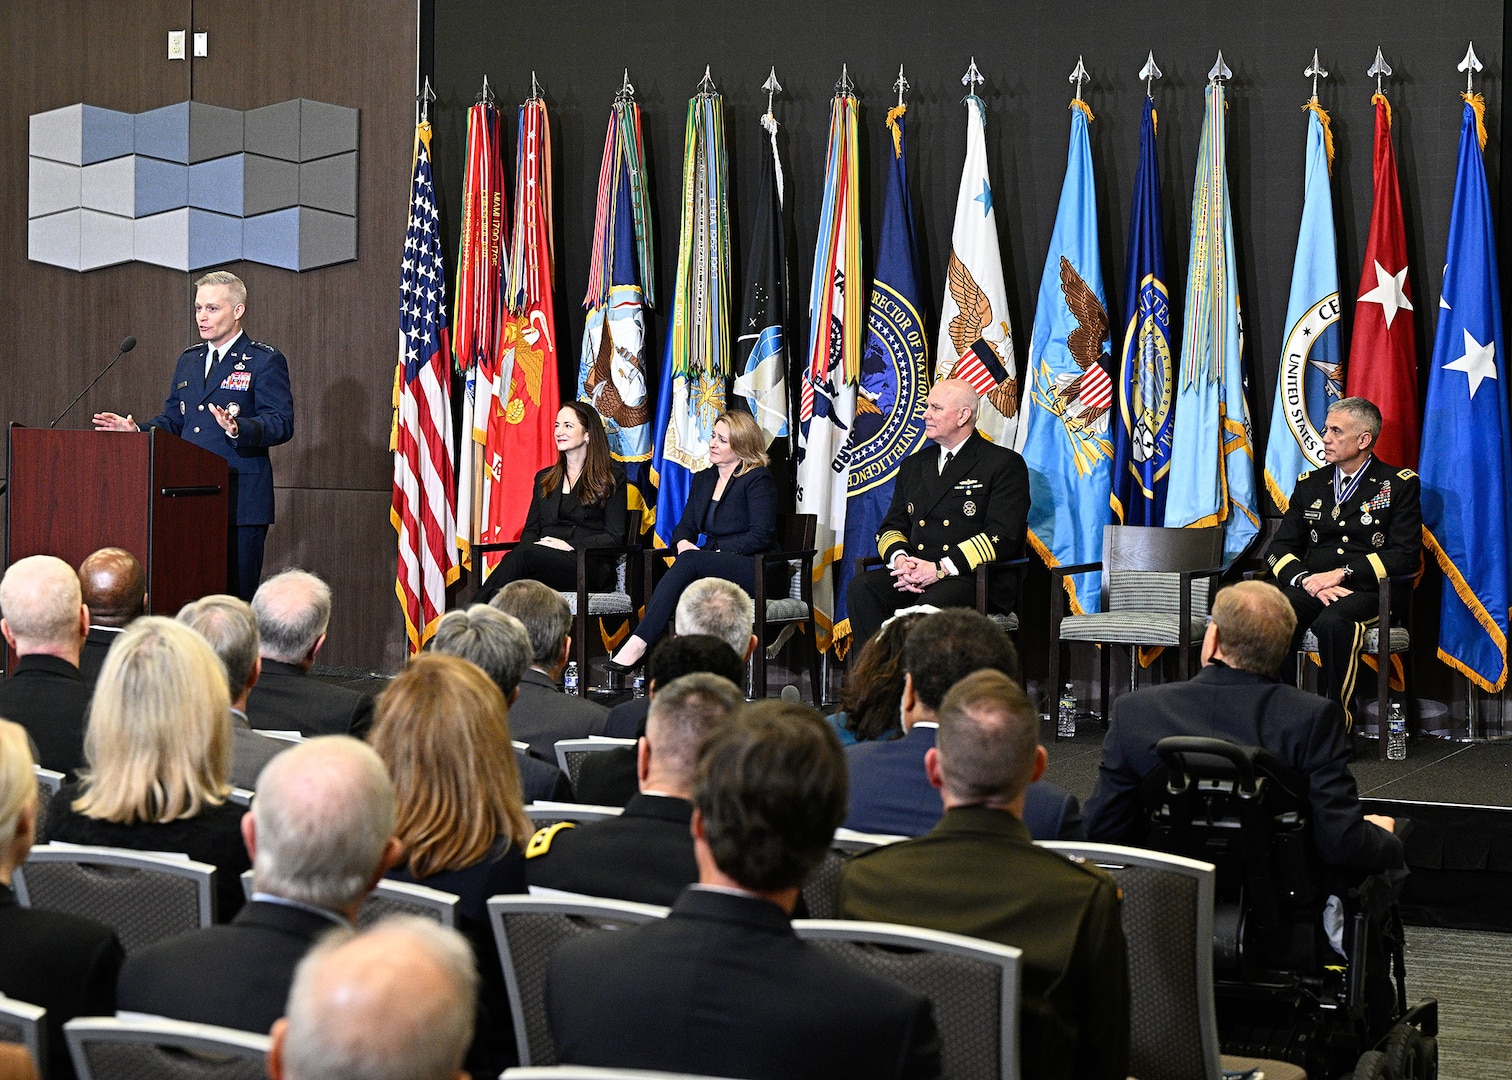 General Timothy D. Haugh, U.S. Air Force, assumed command of U.S. Cyber Command (USCYBERCOM) and the National Security Agency (NSA)/Central Security Service (CSS) on February 2, 2024, during a change of command, directorship, and responsibility ceremony at USCYBERCOM/NSA/CSS Headquarters